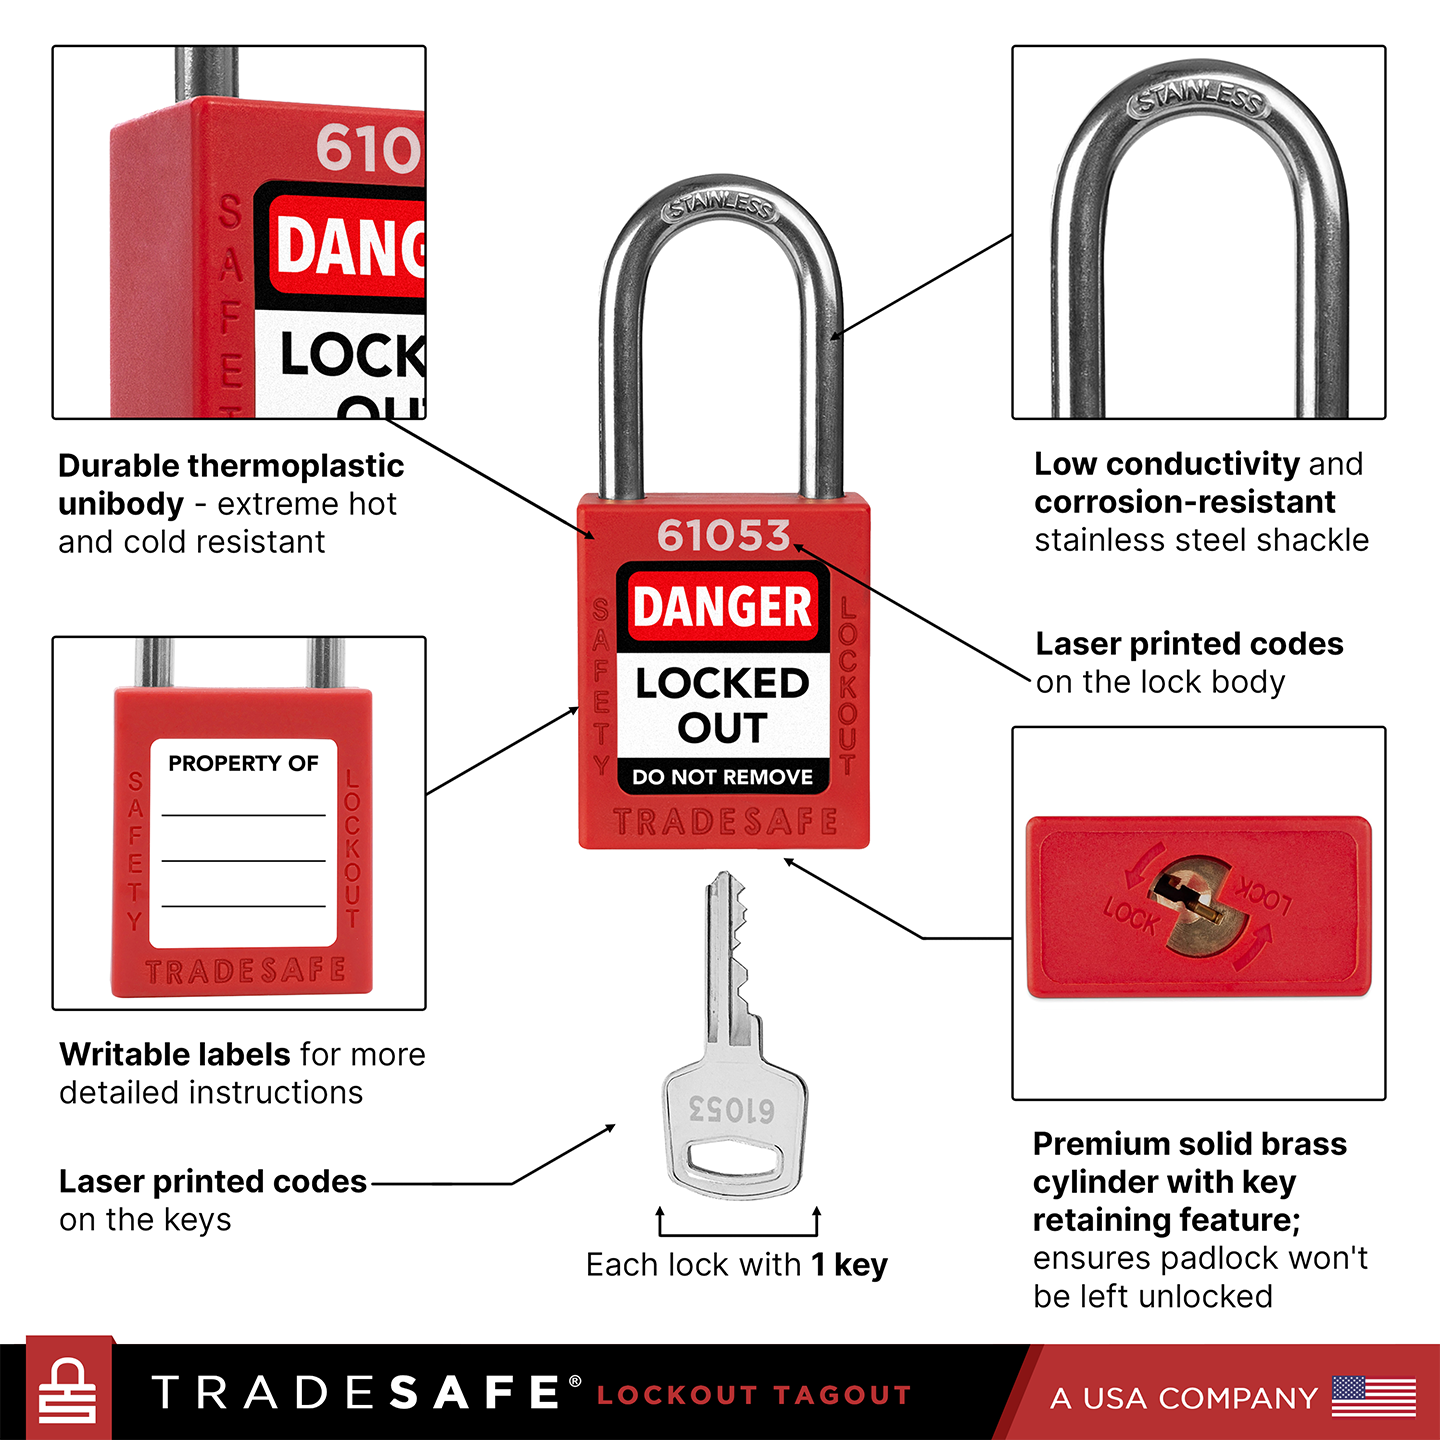 tradesafe loto padlock infographic featuring the different material used, characteristics and functions of each part